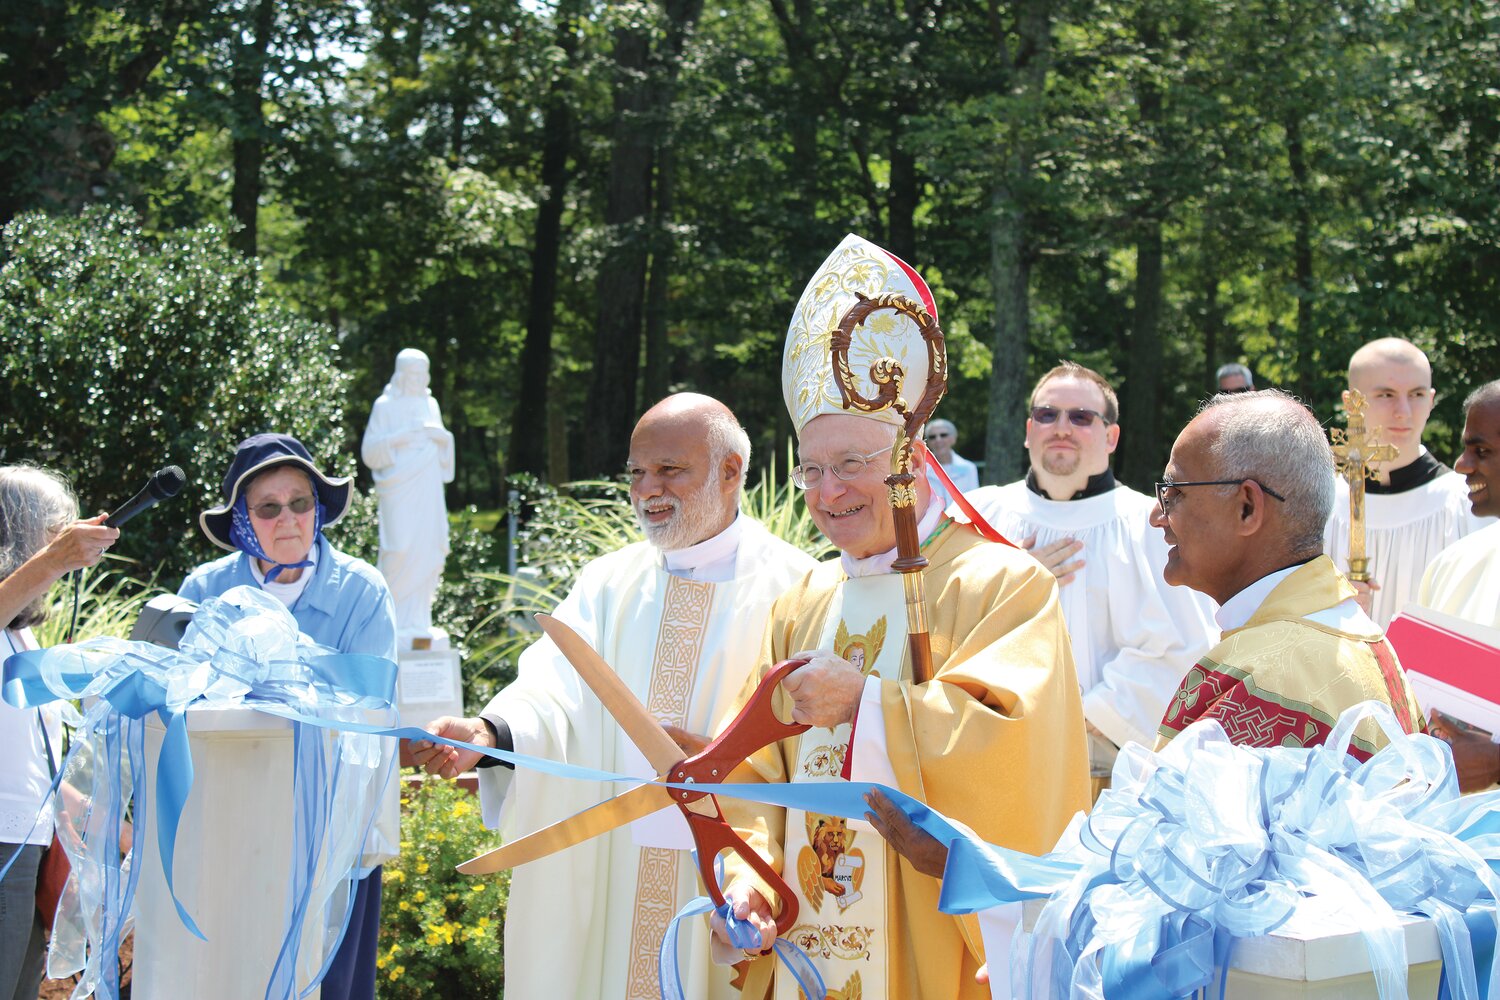 Bishop Robert C. Evans celebrated a Mass commemorating the 100th anniversary of the Shrine of the Little Flower.  Bishop Evans also led a ribbon-cutting ceremony for the beautiful new Rosary Walk constructed on Shrine grounds, pictured above.